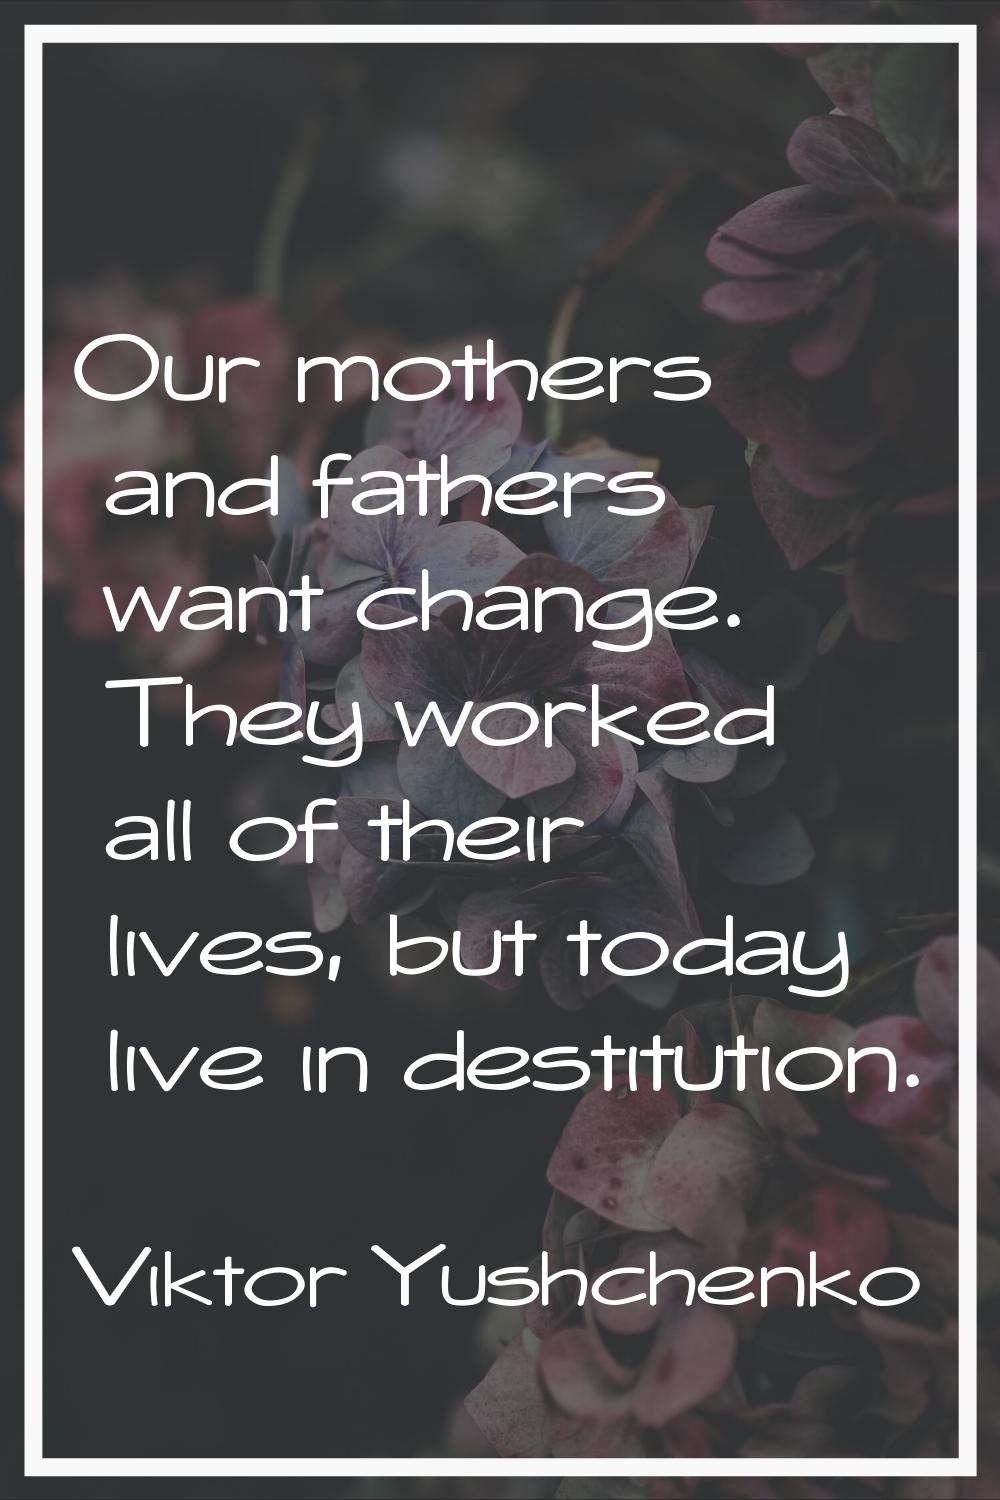 Our mothers and fathers want change. They worked all of their lives, but today live in destitution.